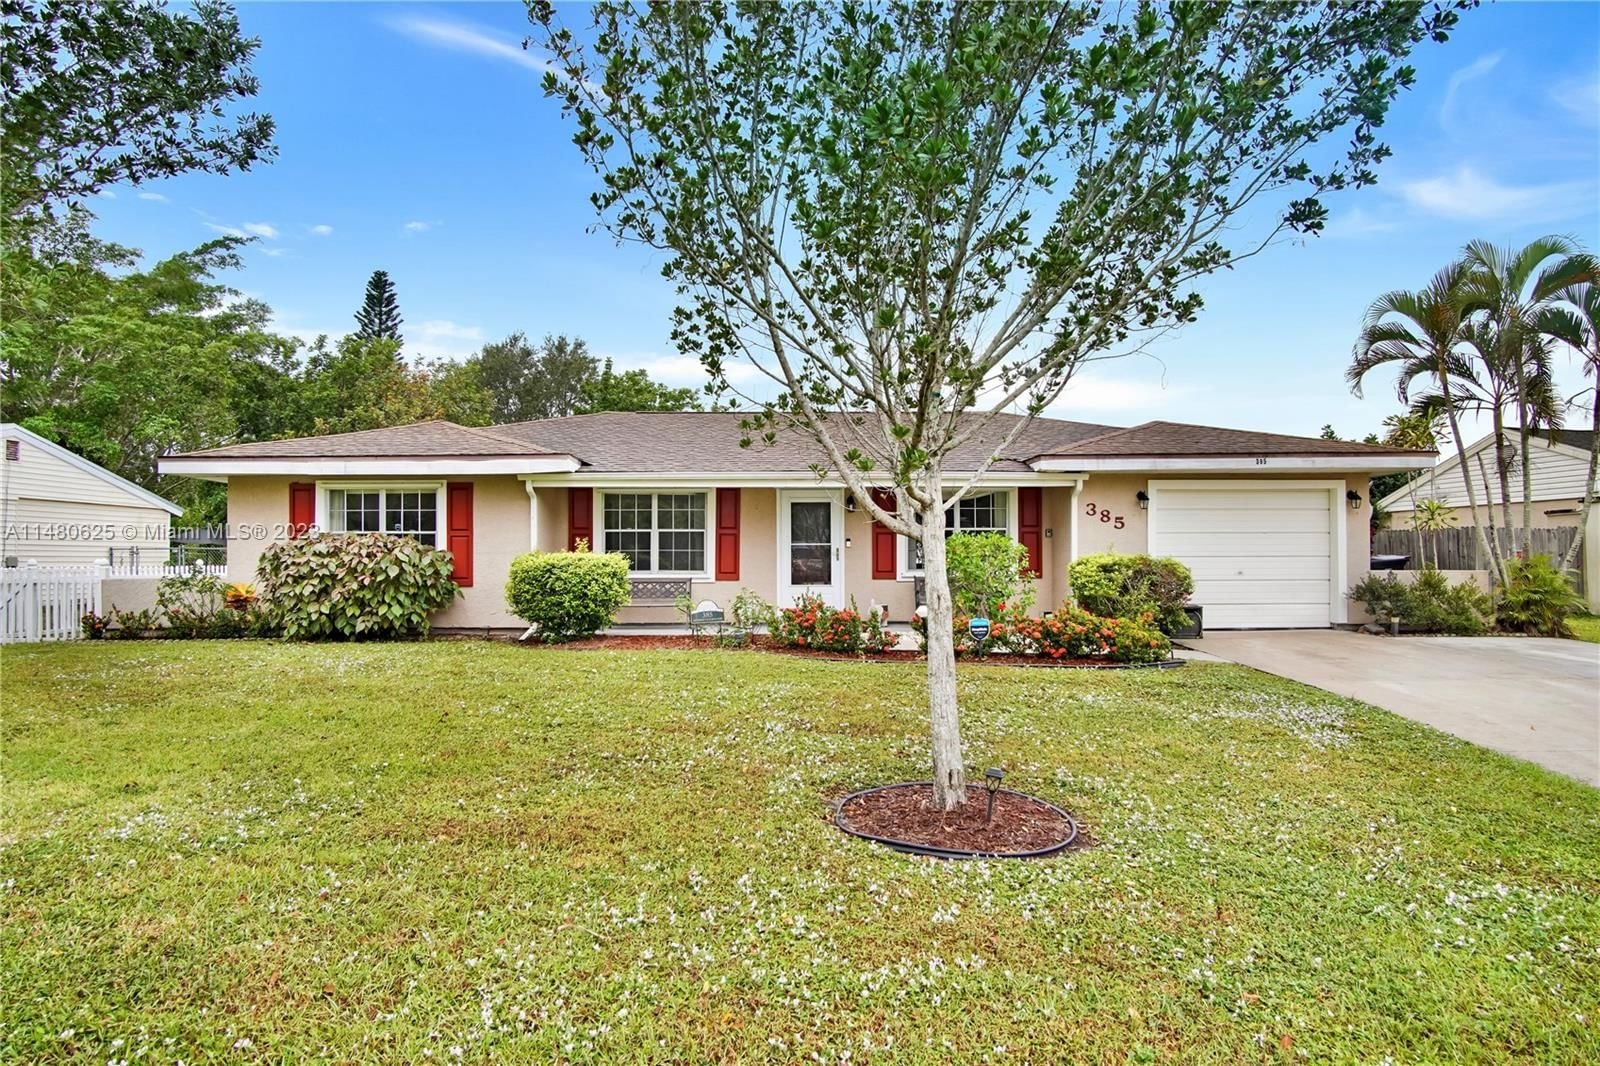 Real estate property located at 385 Tulip Blvd, St Lucie County, Port St. Lucie, FL